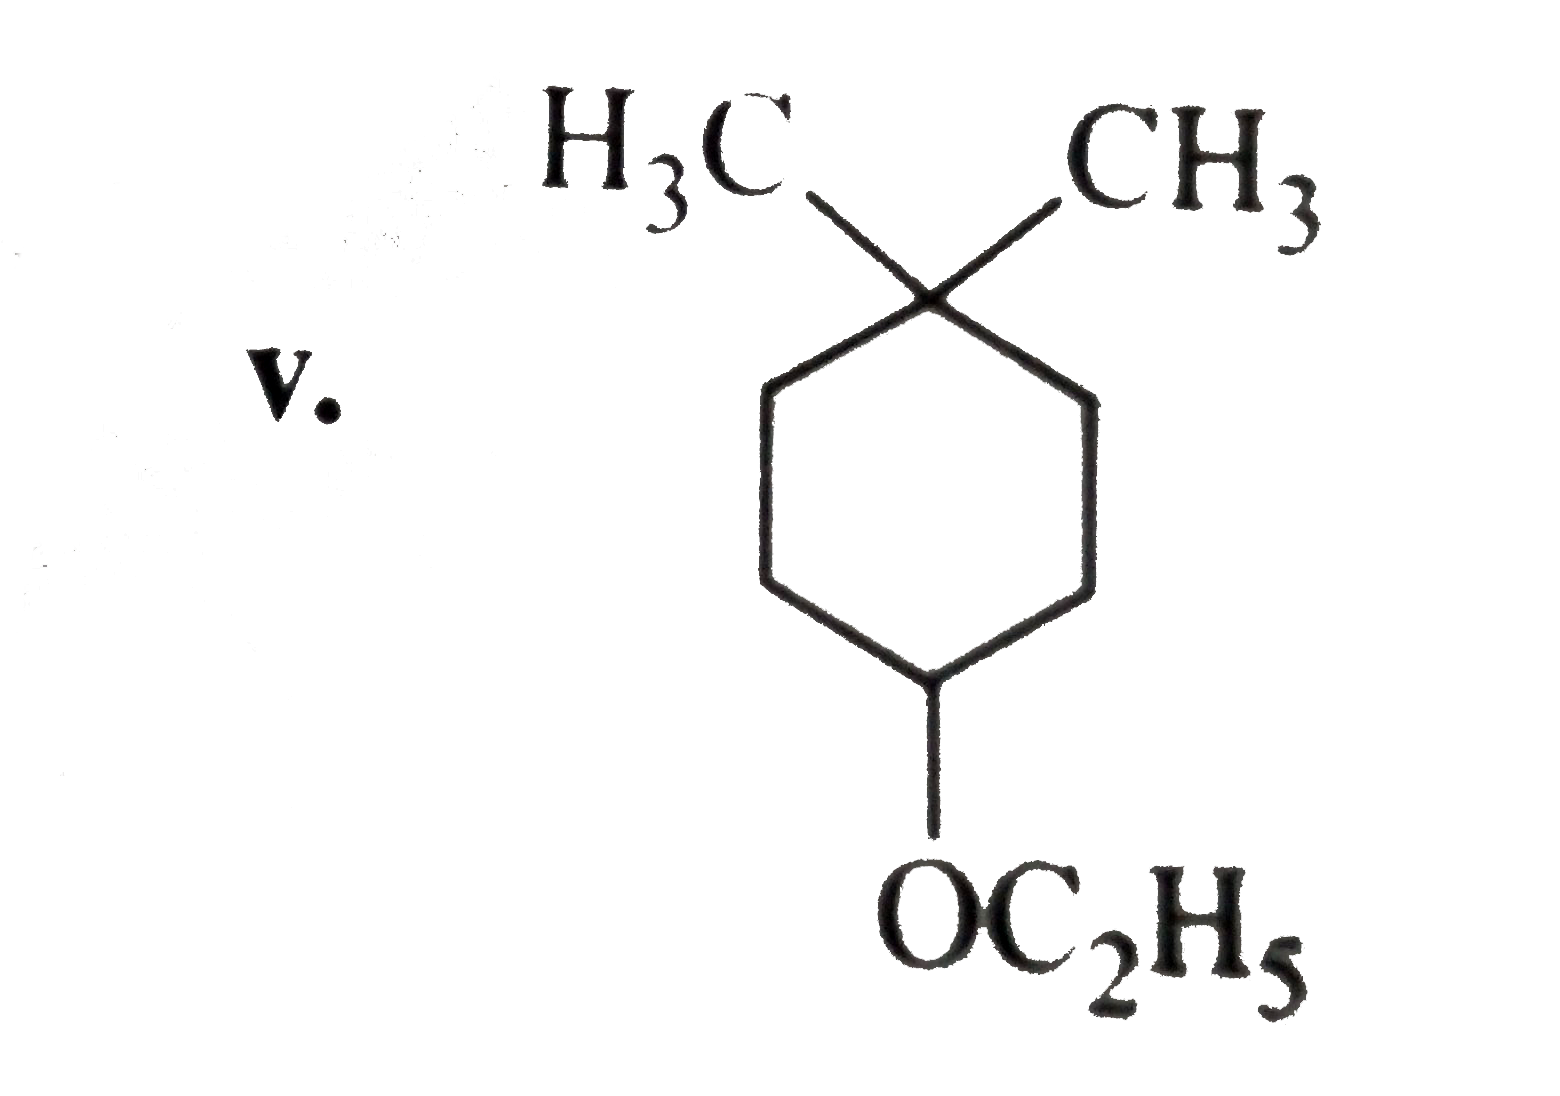 Give the IUPAC names of the following ethers:   C(2)H(5)OCH(2)--overset (CH) underset (CH(3)) underset (|)---CH(3)   ii.  CH(3)OCH(2)CH(2)CI   iii. O(2)N---C(6)H(4)---OCH(3)(p)   iv. CH(3)CH(2)CH(2)OCH(3)   v.    vi.